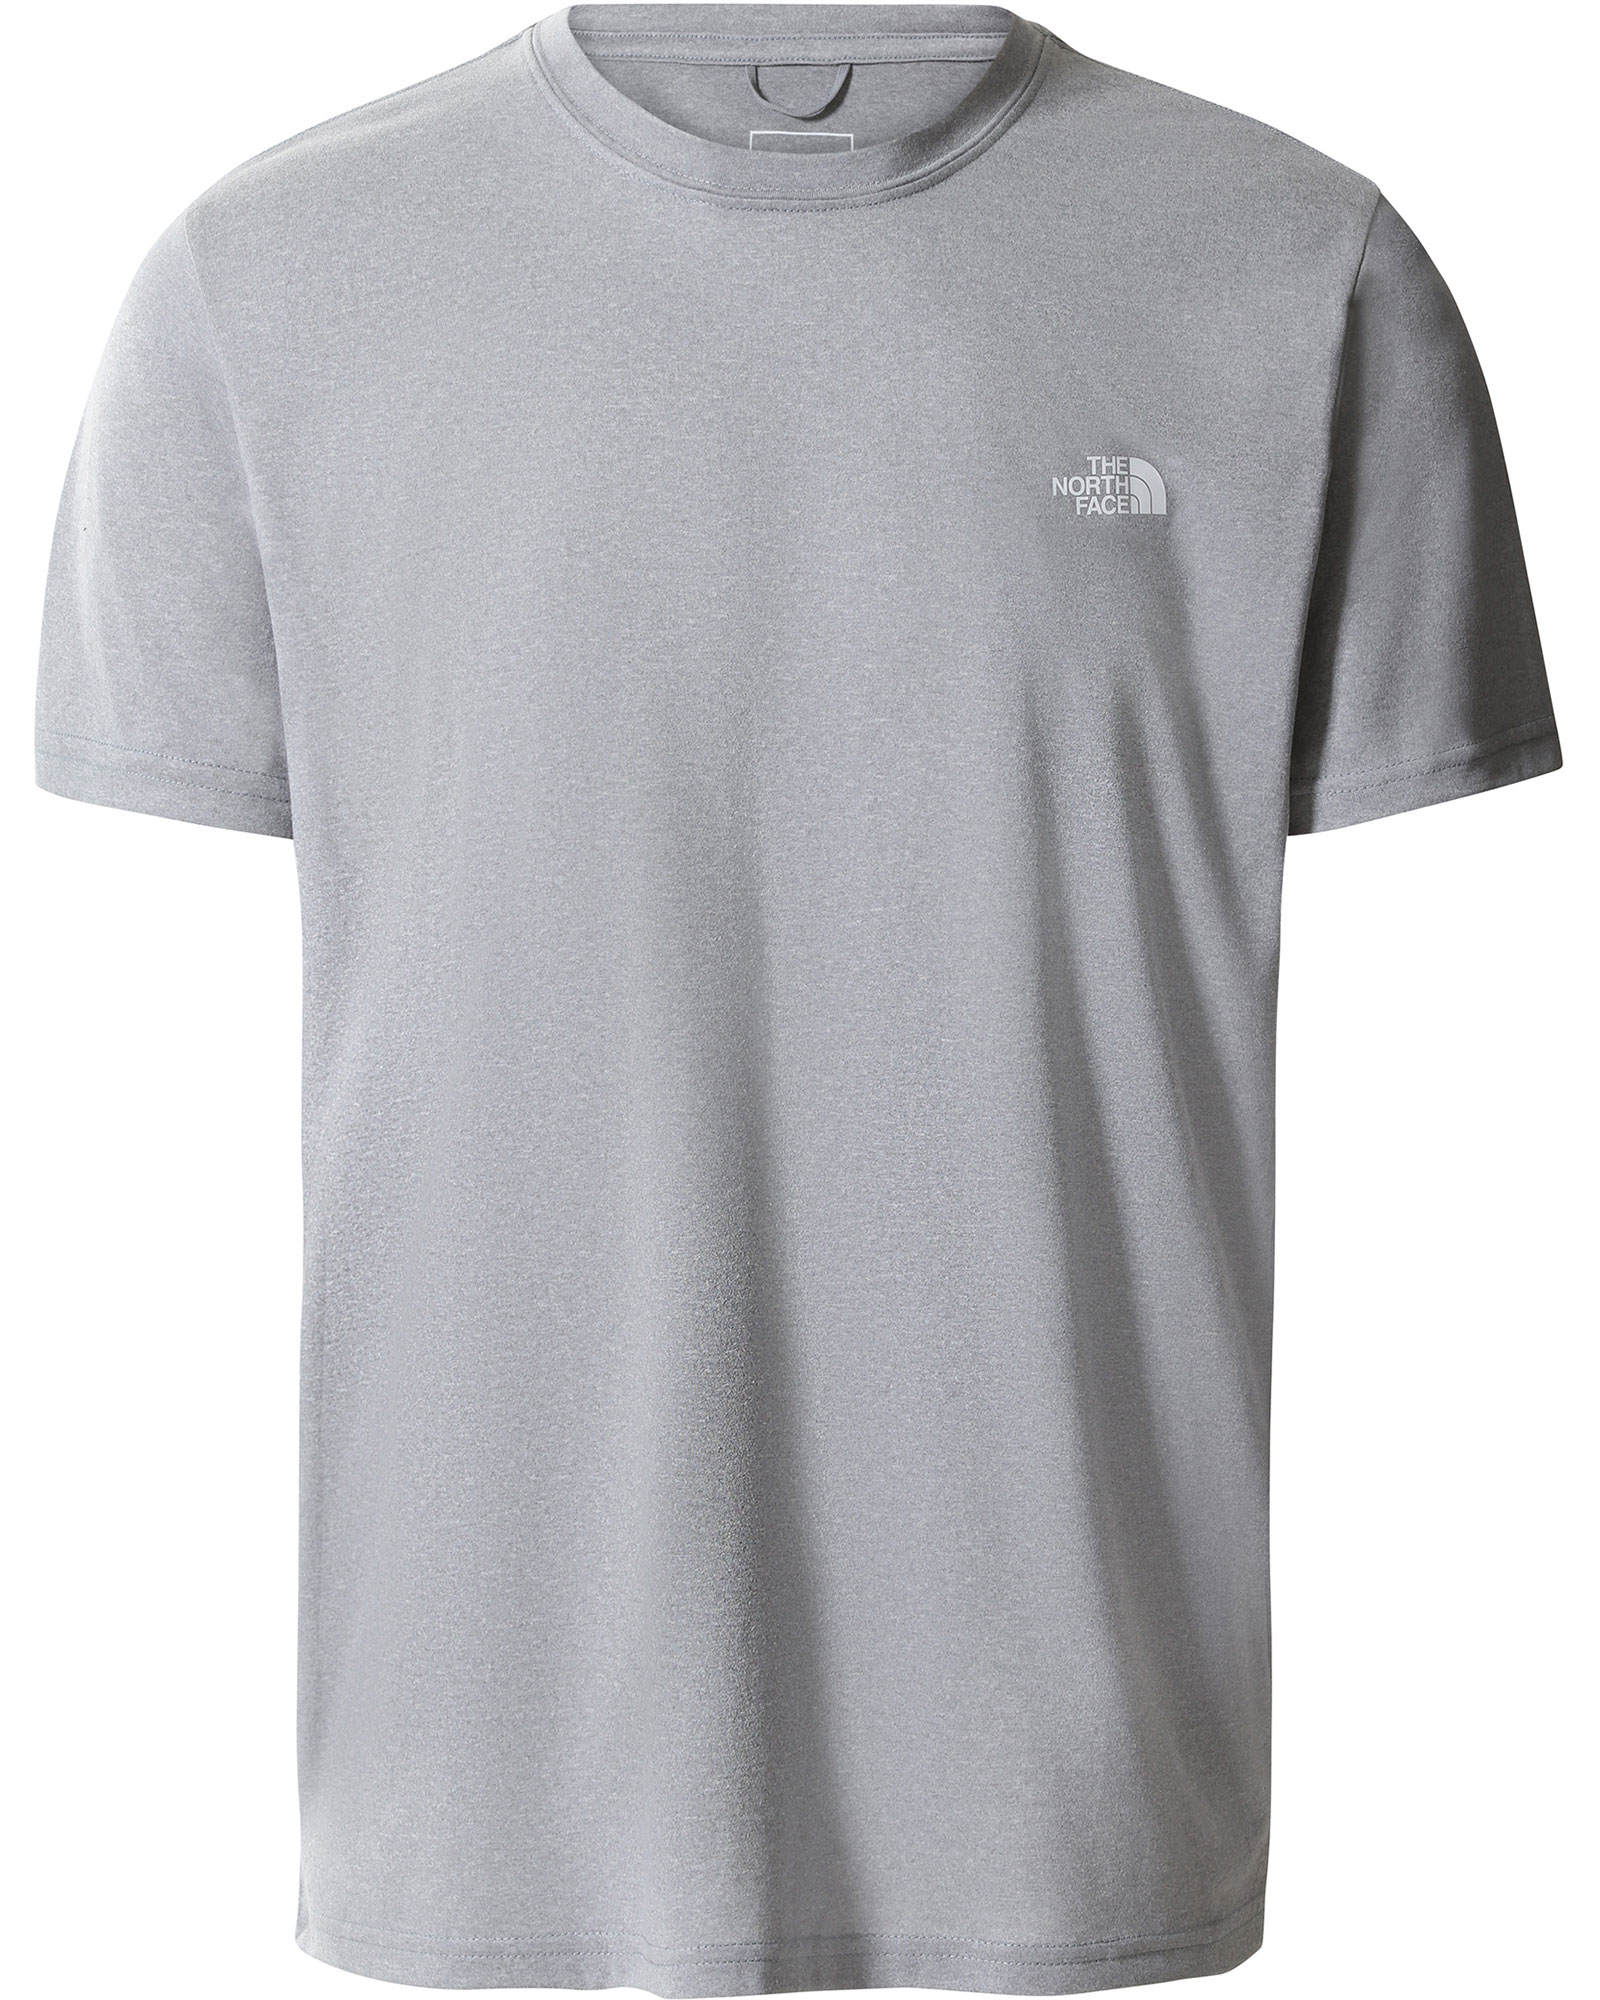 The North Face Reaxion Amp Men’s Crew T Shirt - Mid Grey Heather XXL